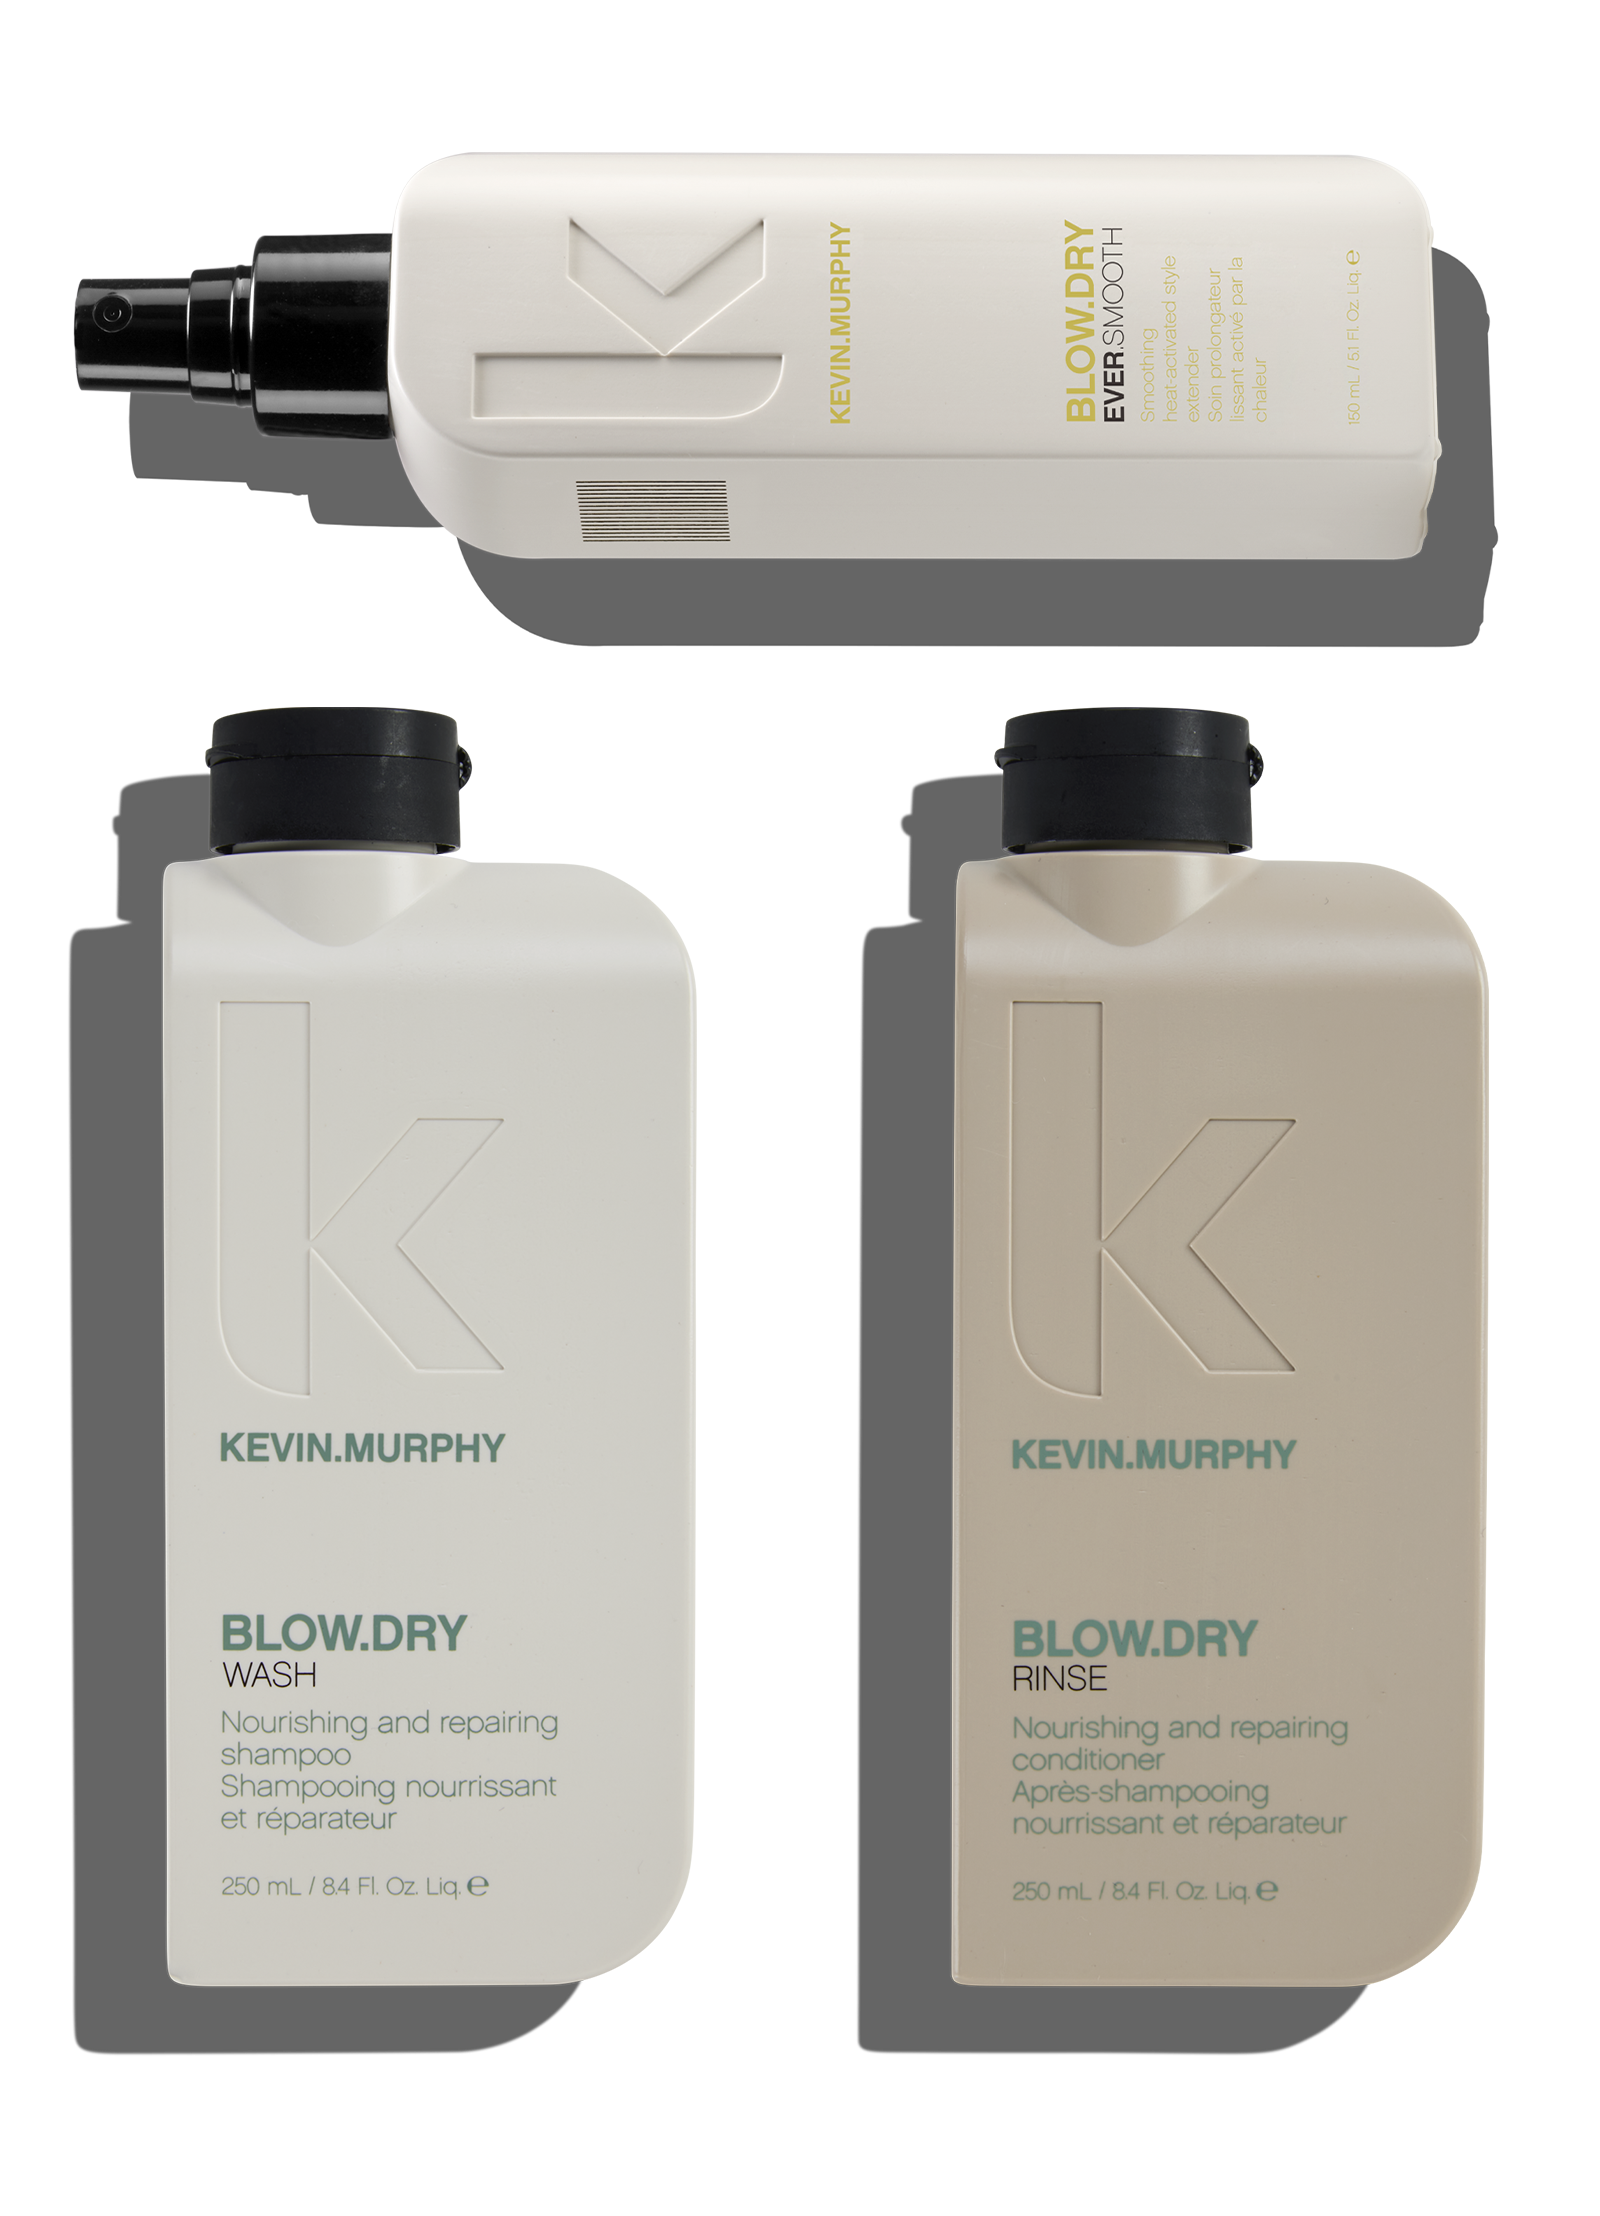 KEVIN.MUPRHY Blow.Dry Gift Pack